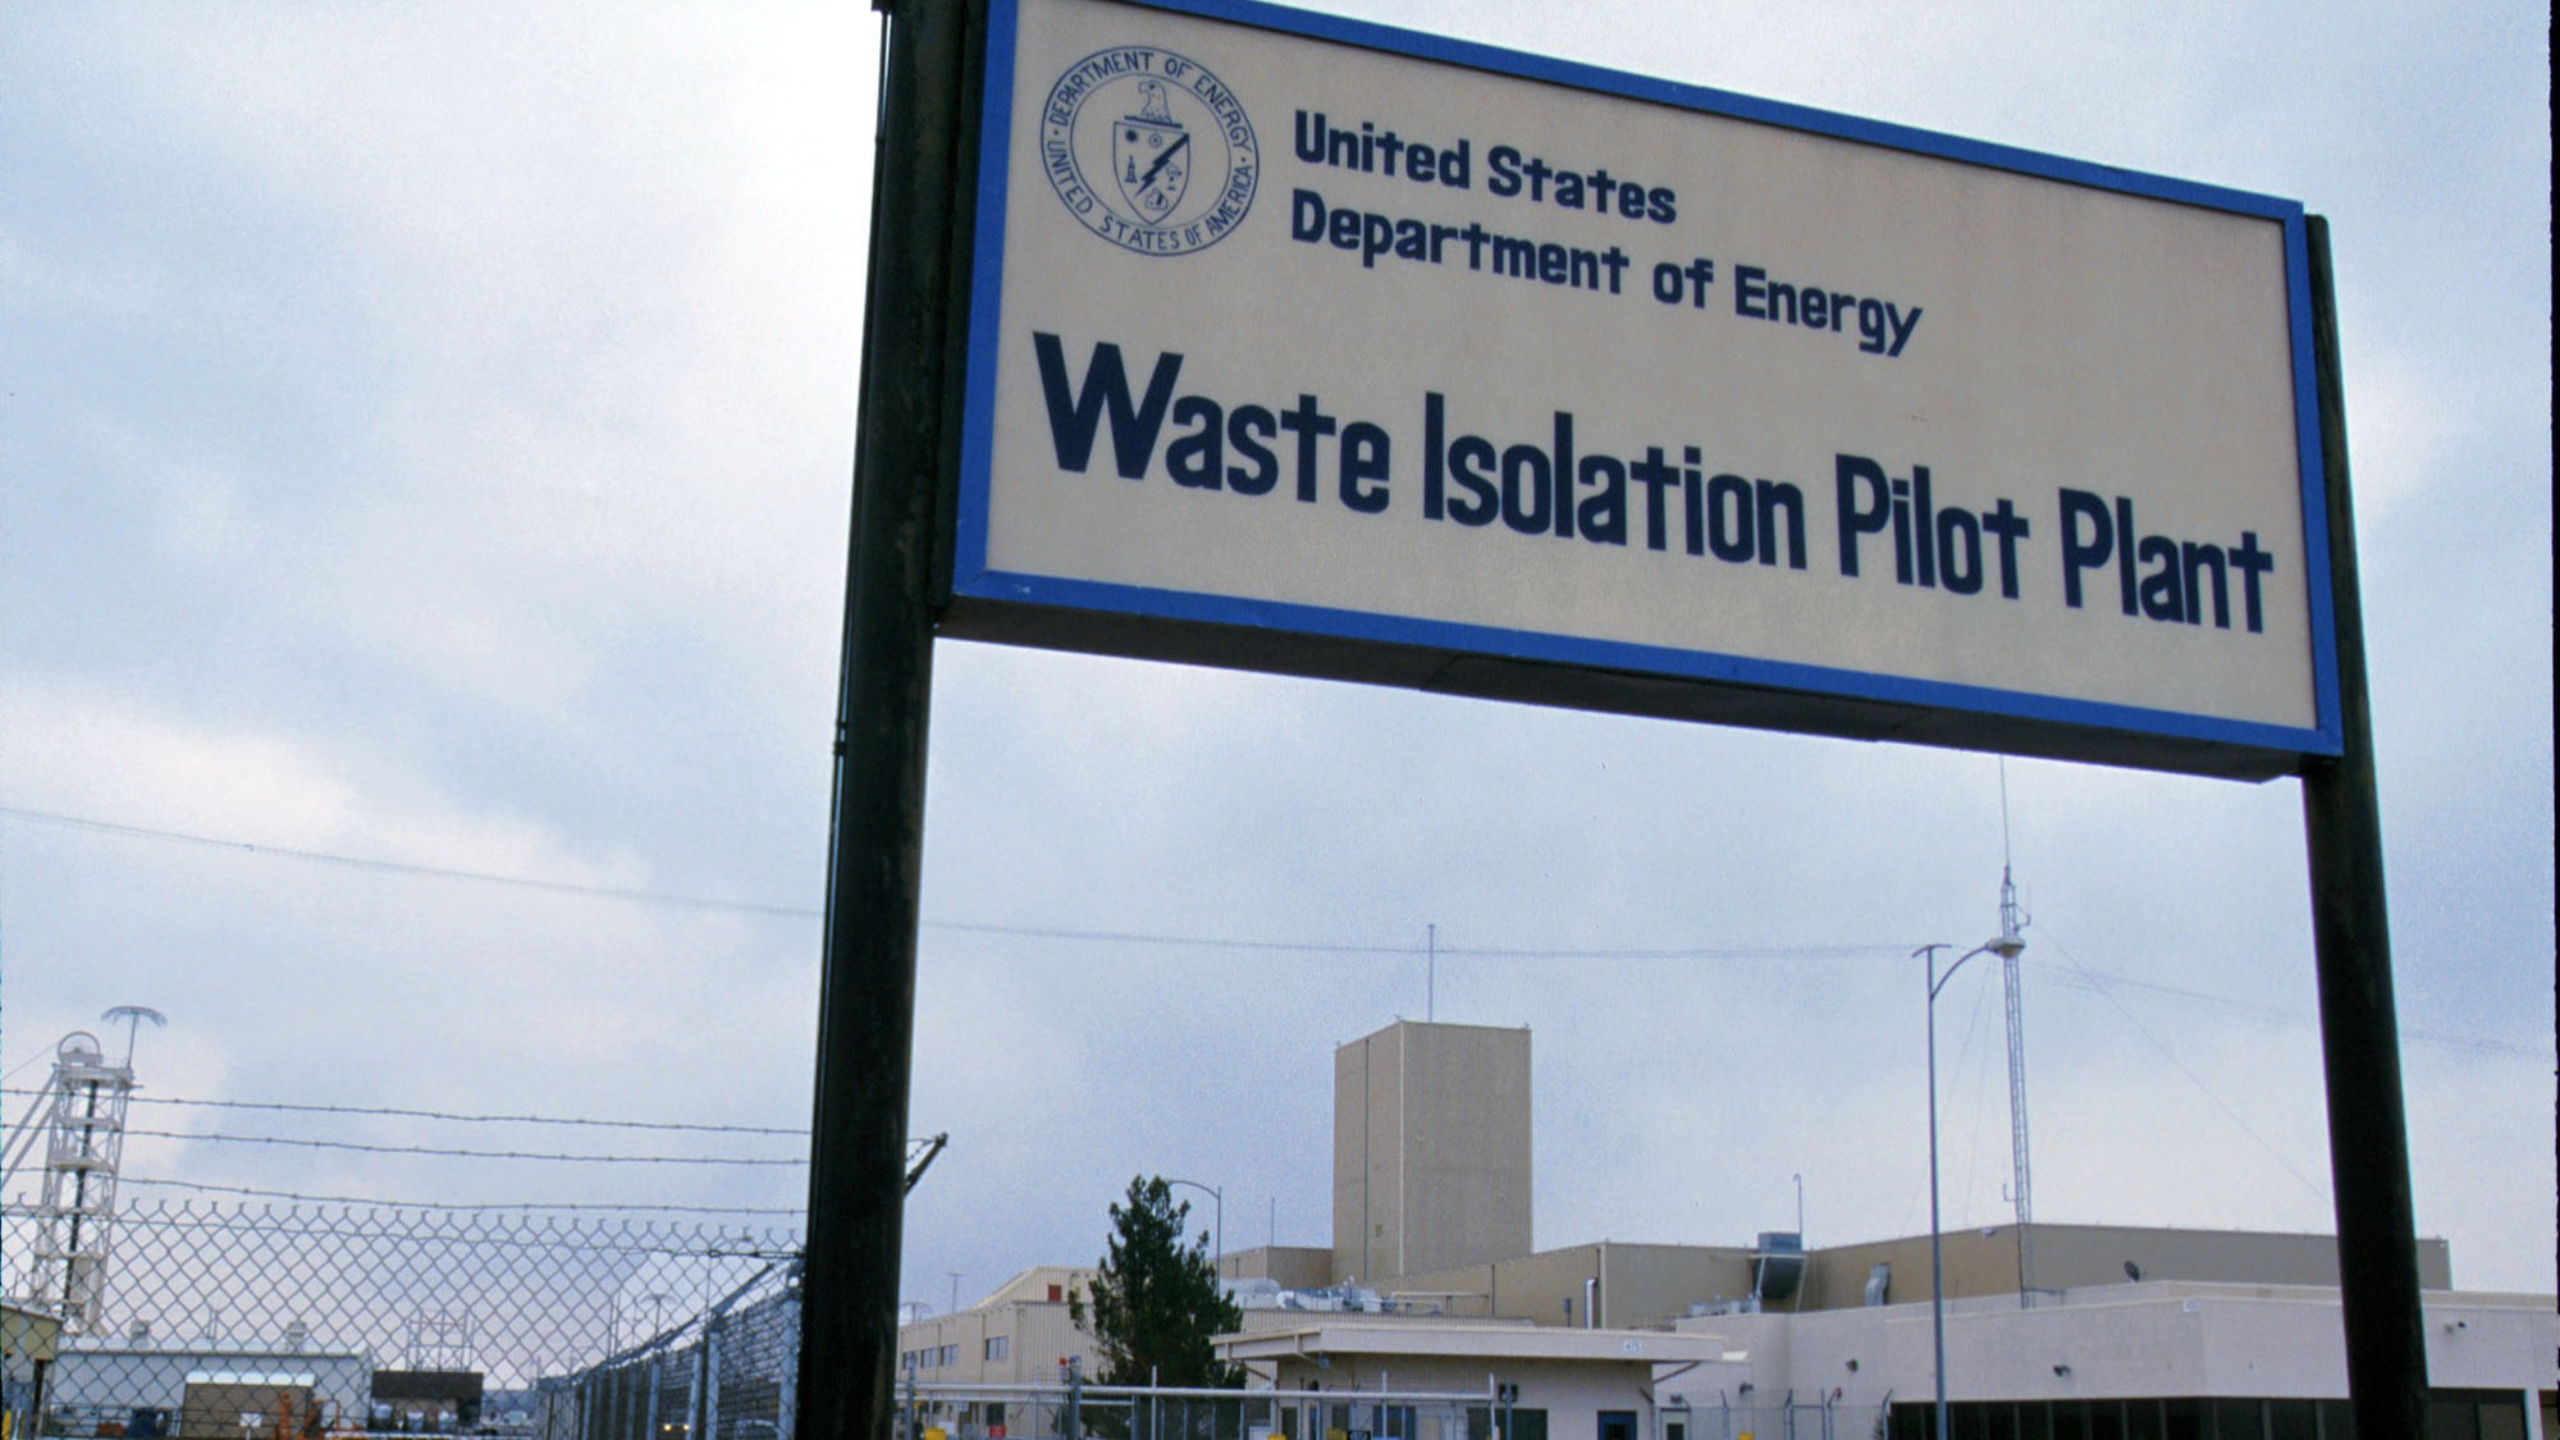 Cold War-era atomic weapons facilities in the US could become clean energy powerhouses